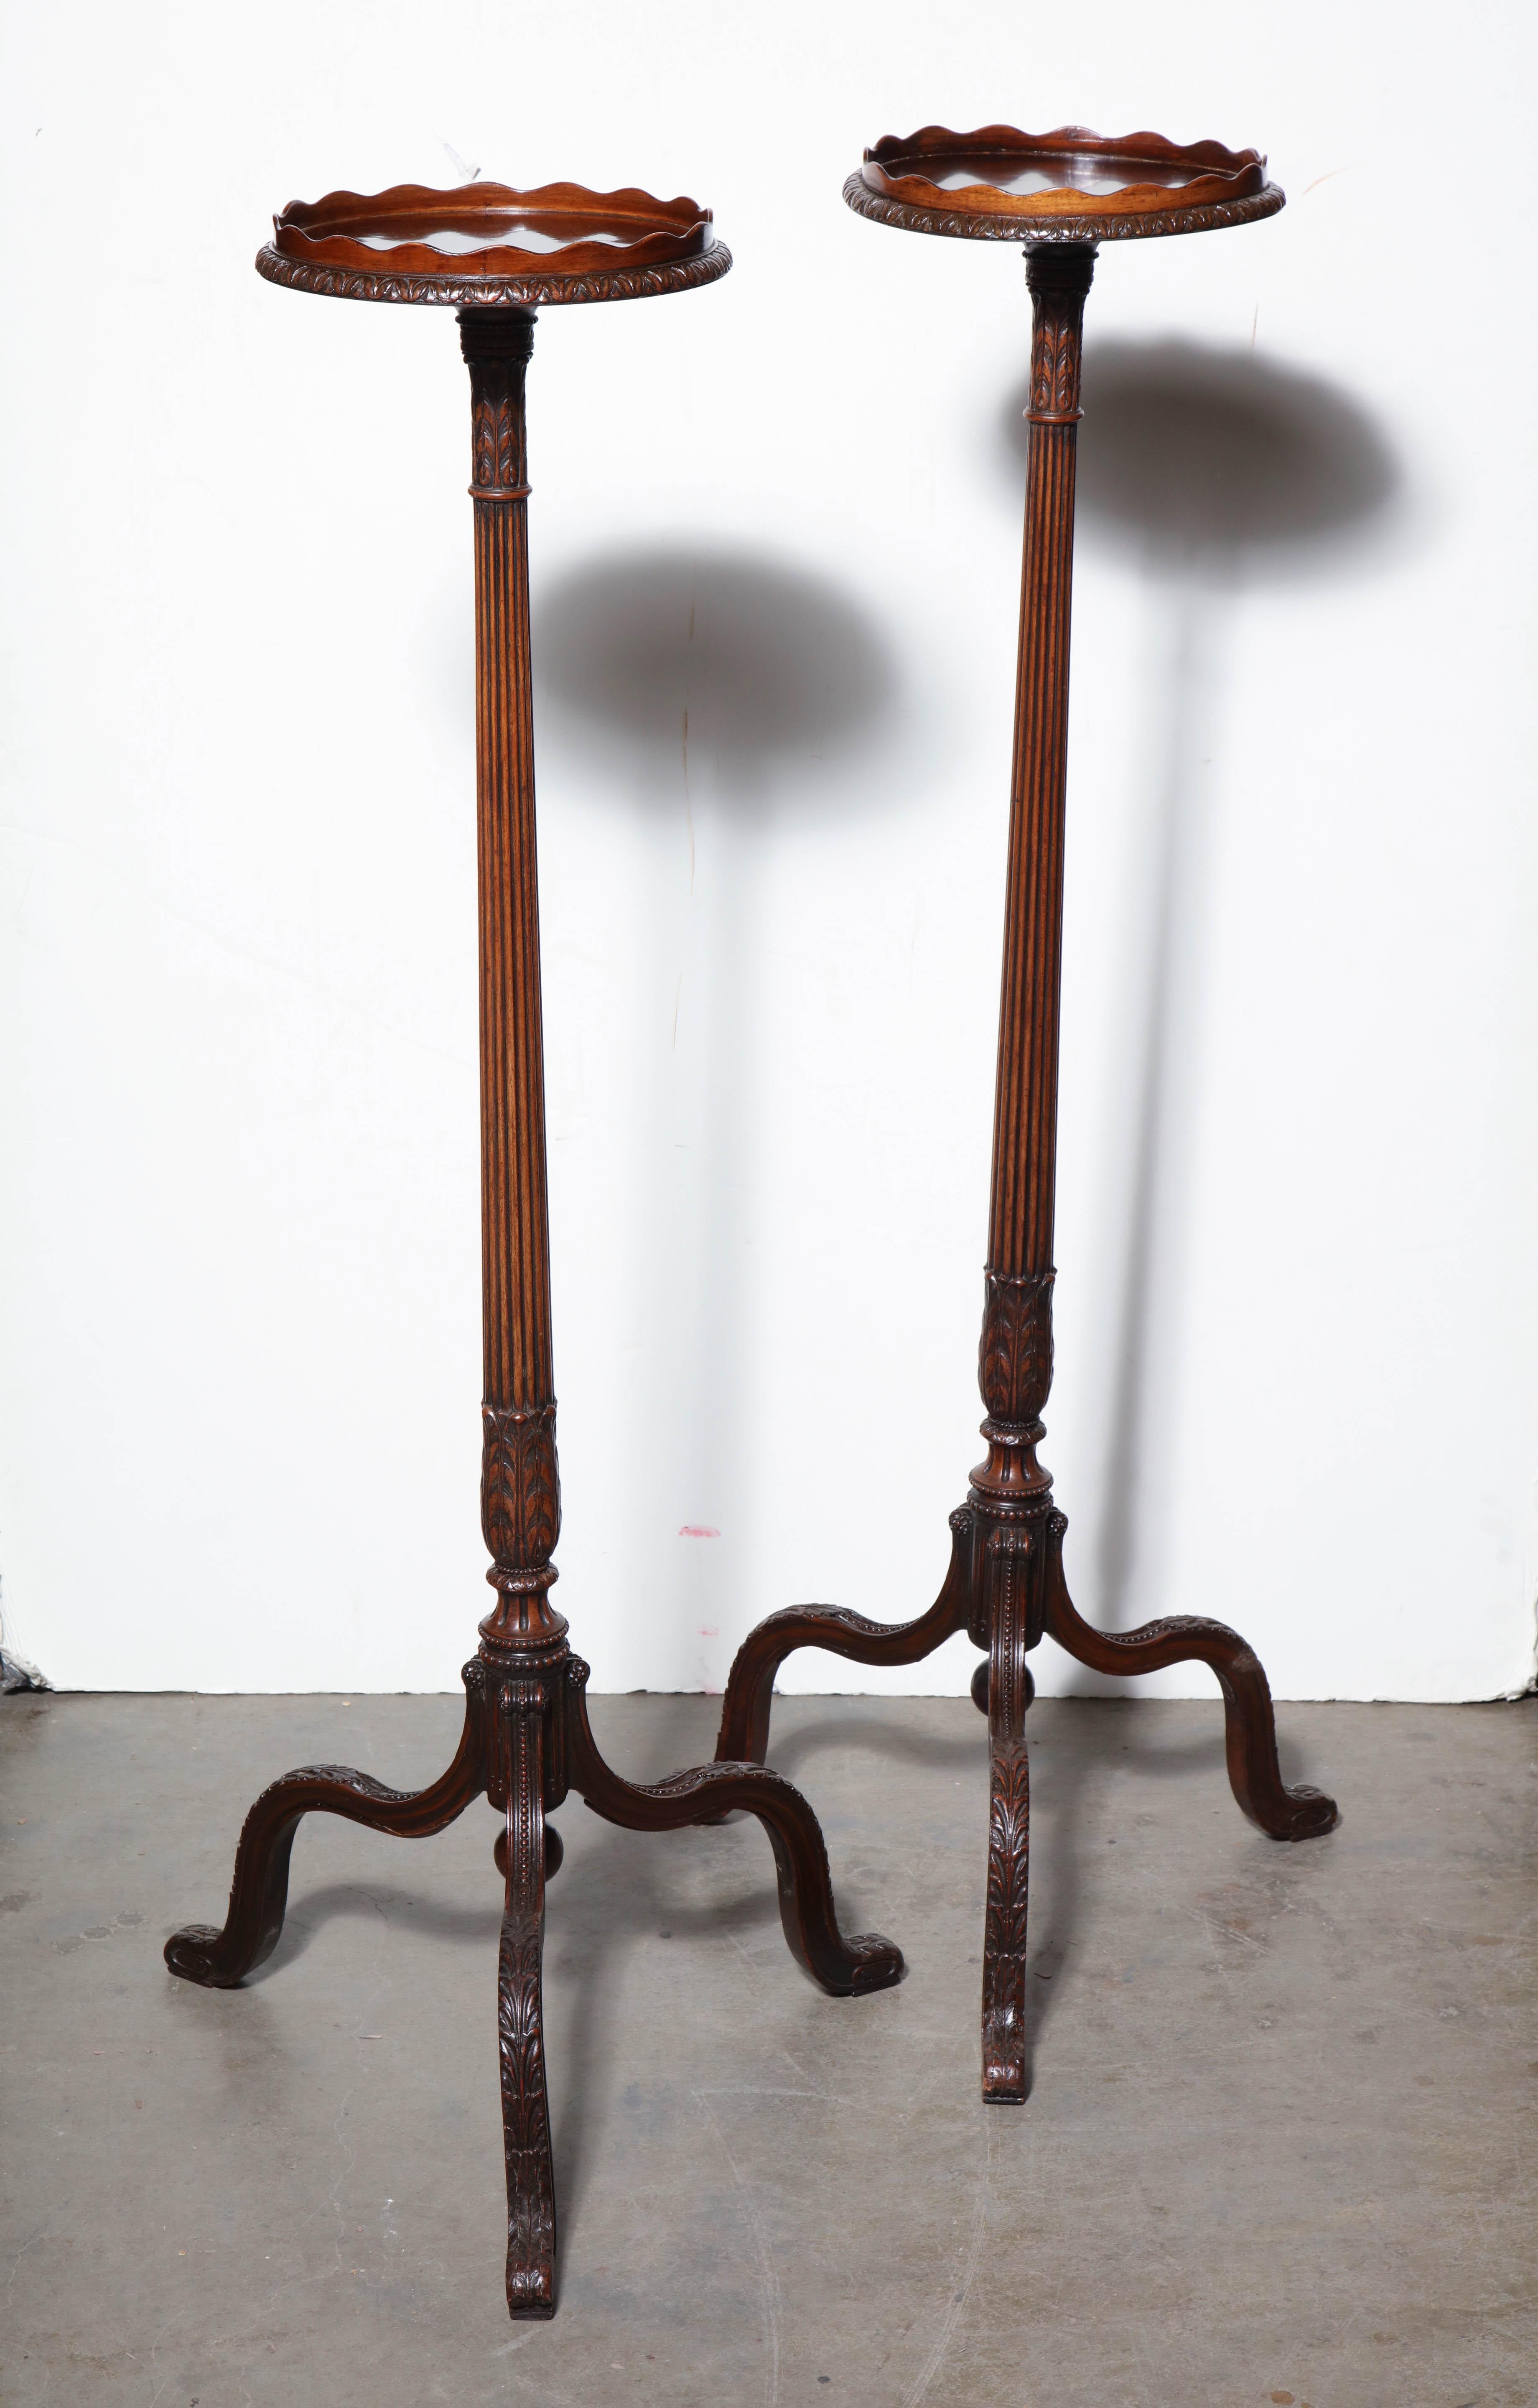 Pair of George III mahogany scroll foot pedestals with scalloped carved gallery tops, reeded supports, and cabriole legs.

The diameter of top - 11